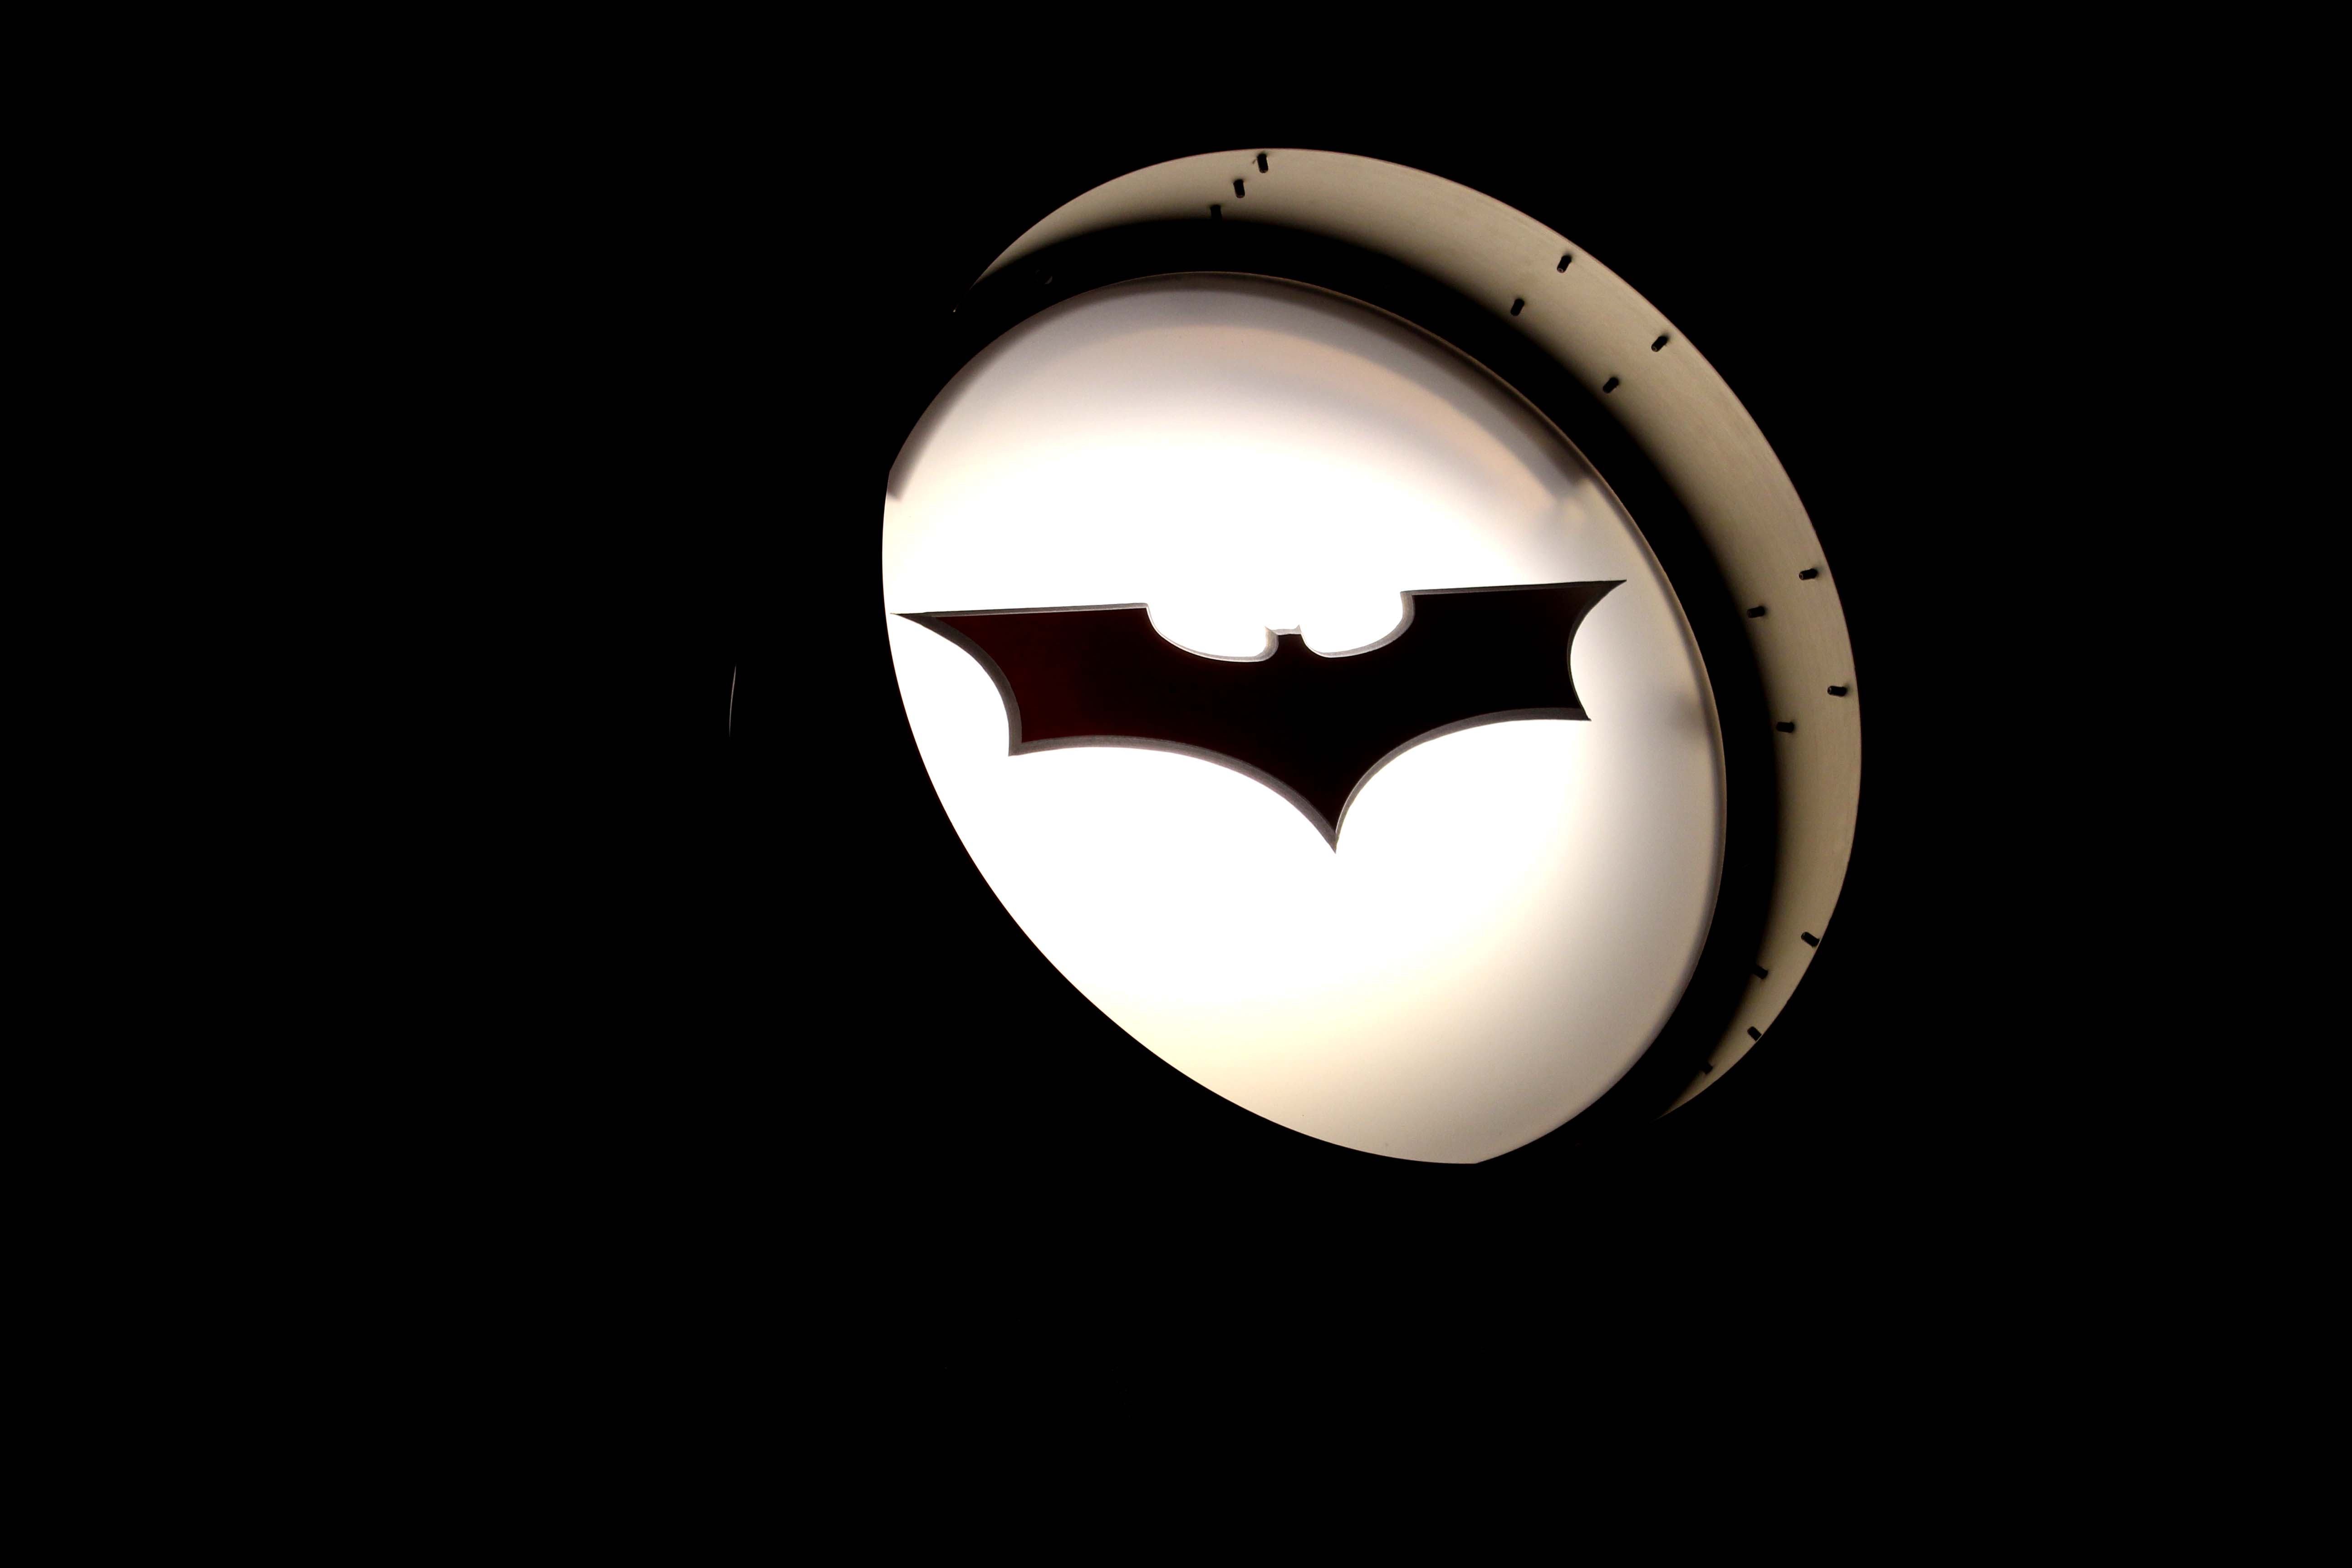 Bat Signal, HD Superheroes, 4k Wallpaper, Image, Background, Photo and Picture